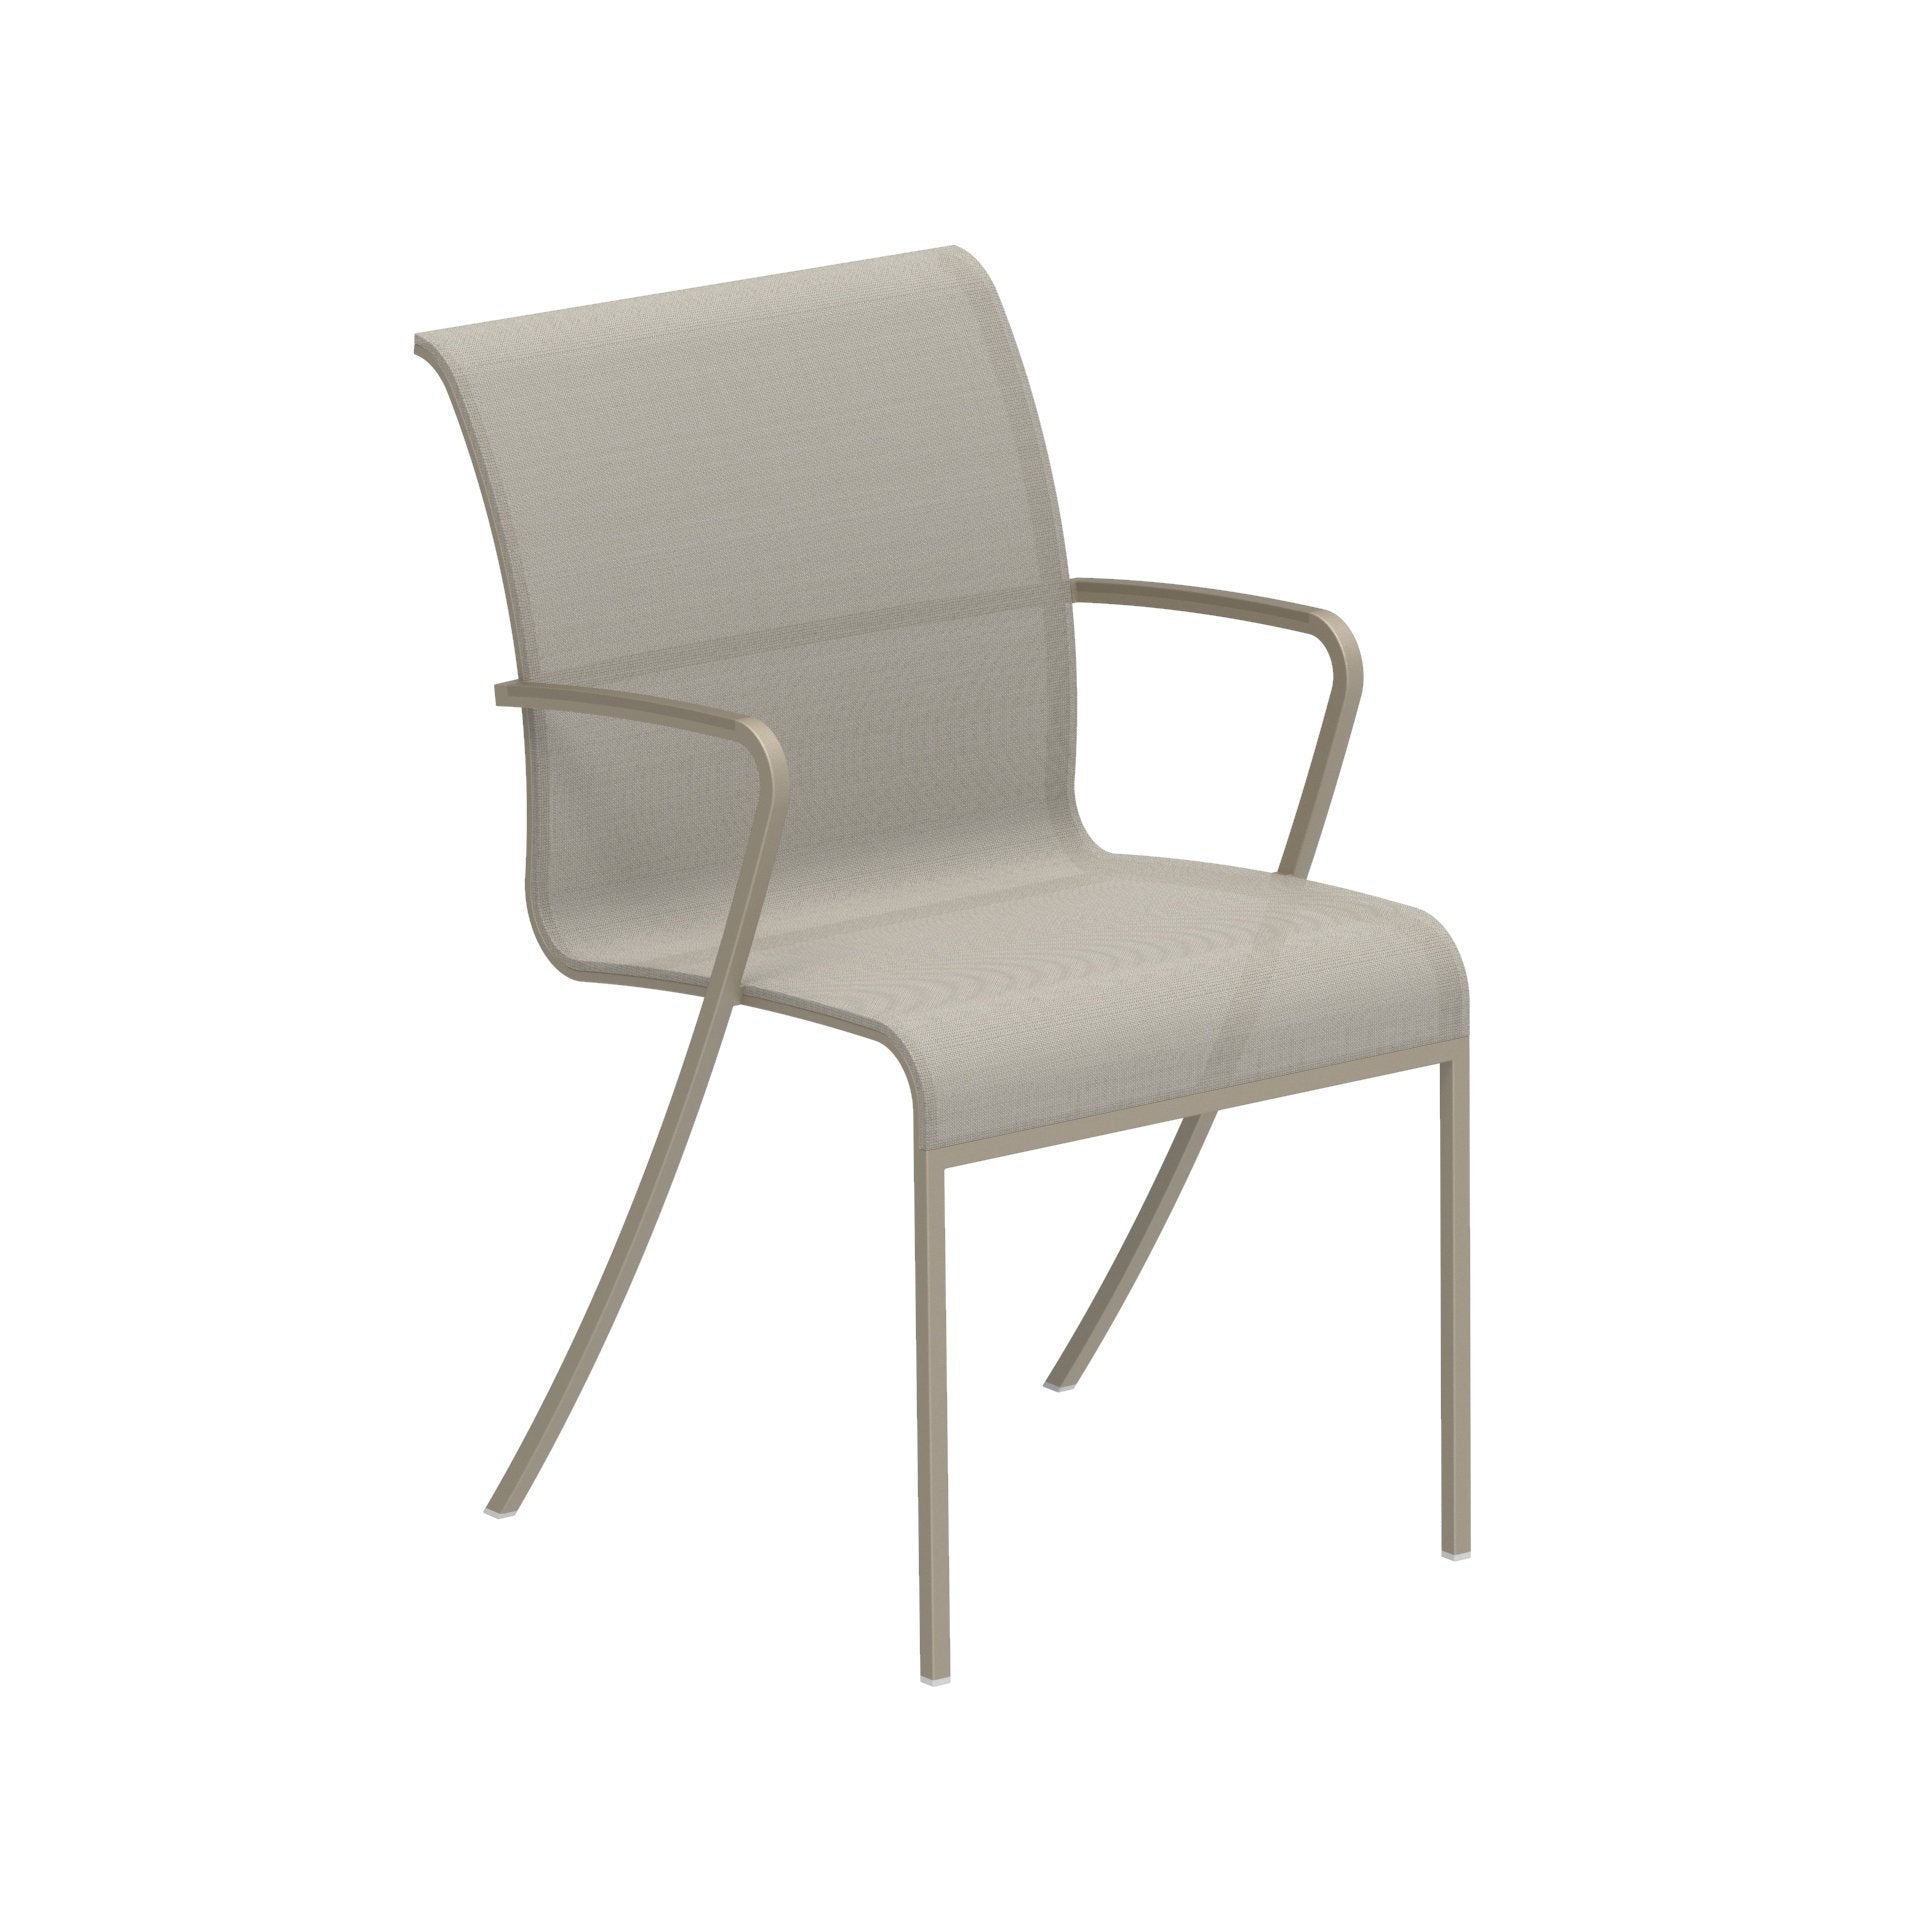 QT 55 Powder-coated Carver Chair